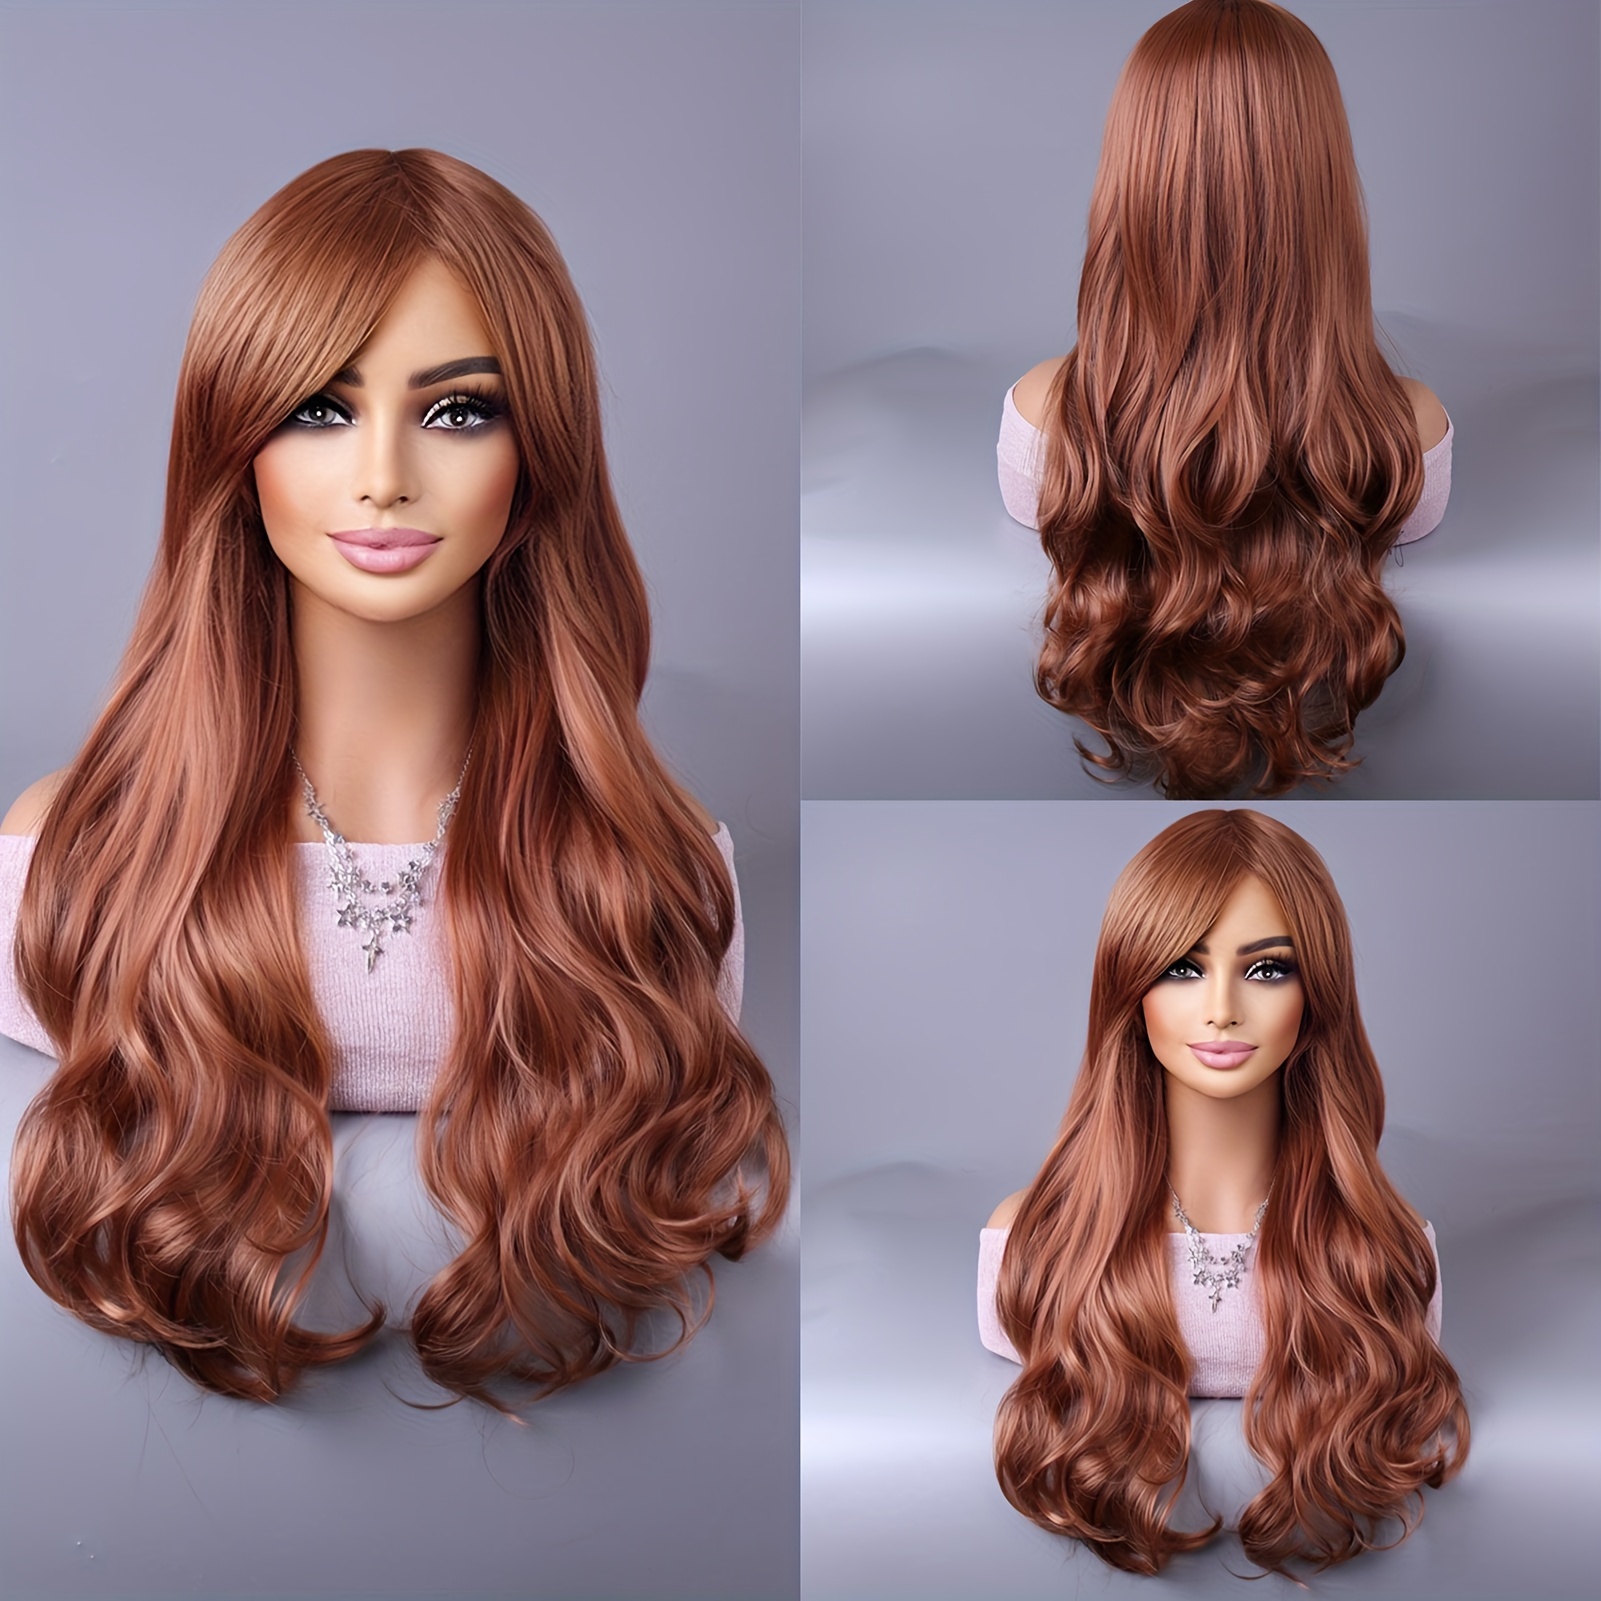 

Long Wave Full Volume Curly Wavy Wig, Multi Color Long Fluffy Curly Hair Wig With Bangs Synthetic Full Curly Hair Wigs Cosplay Party Costume Wigs For Daily Use Wigs